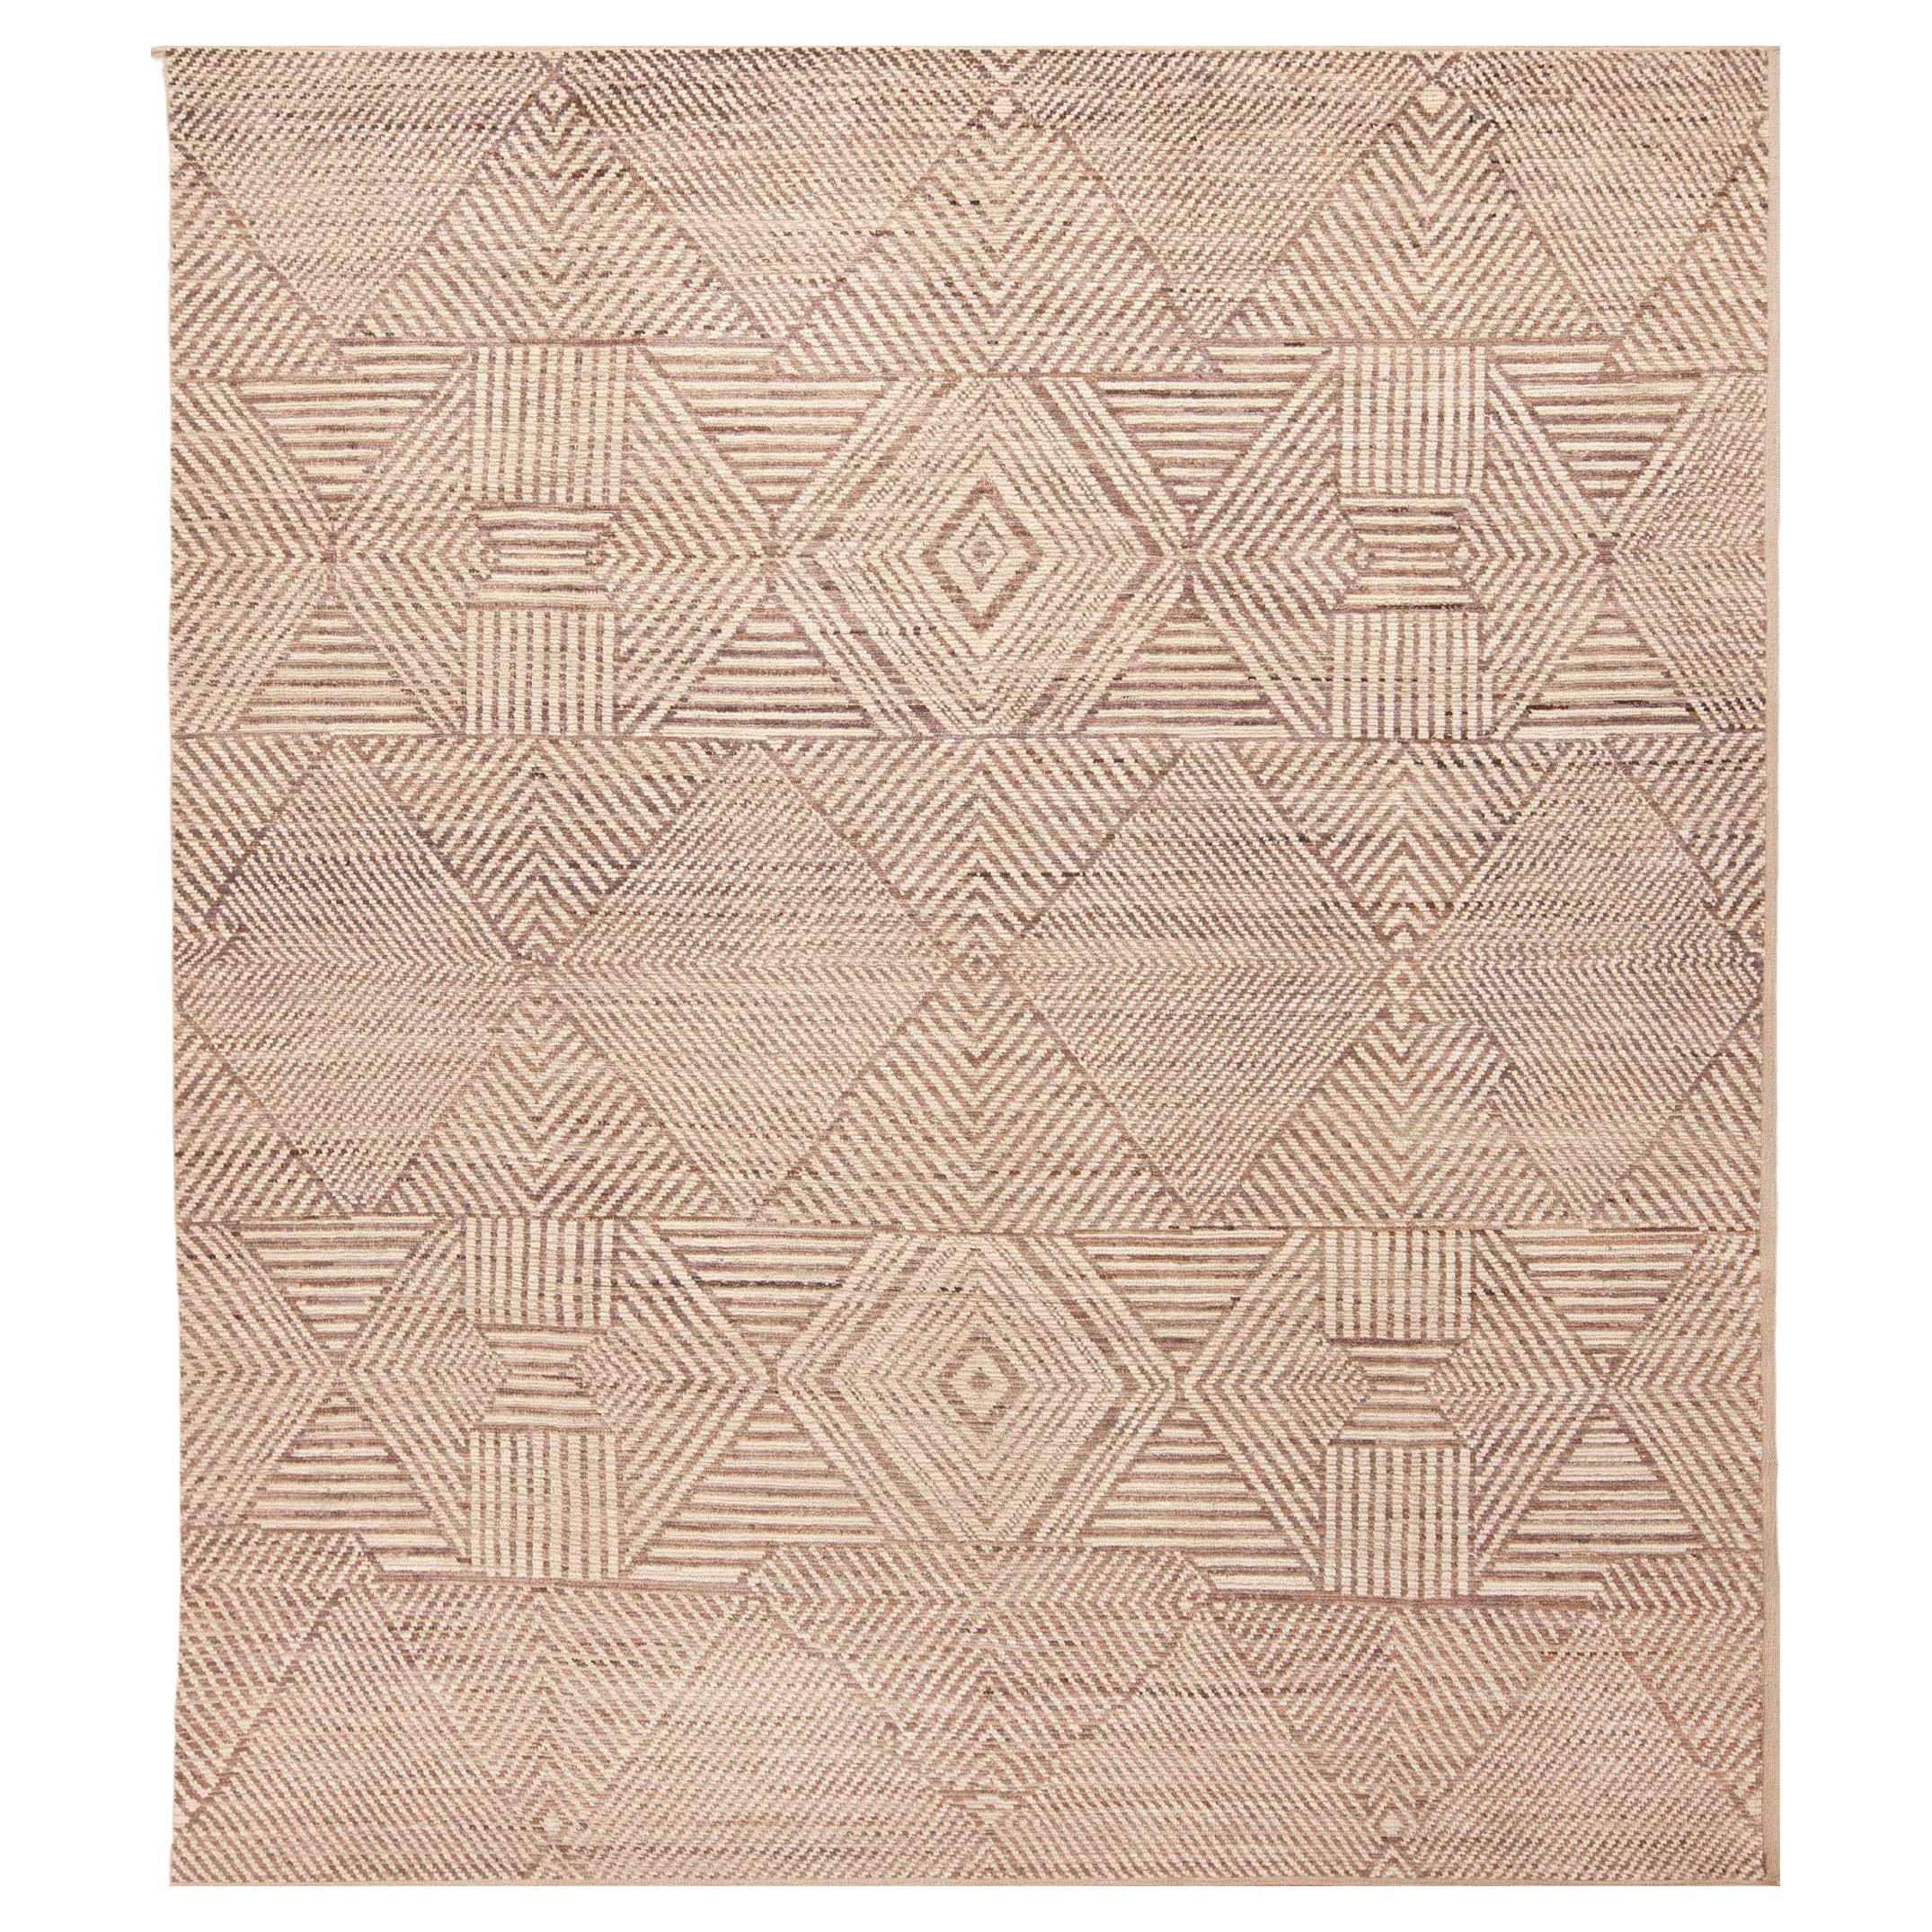 Nazmiyal Collection Tribal Design Modern Neutral Color Area Rug 9' x 10' For Sale